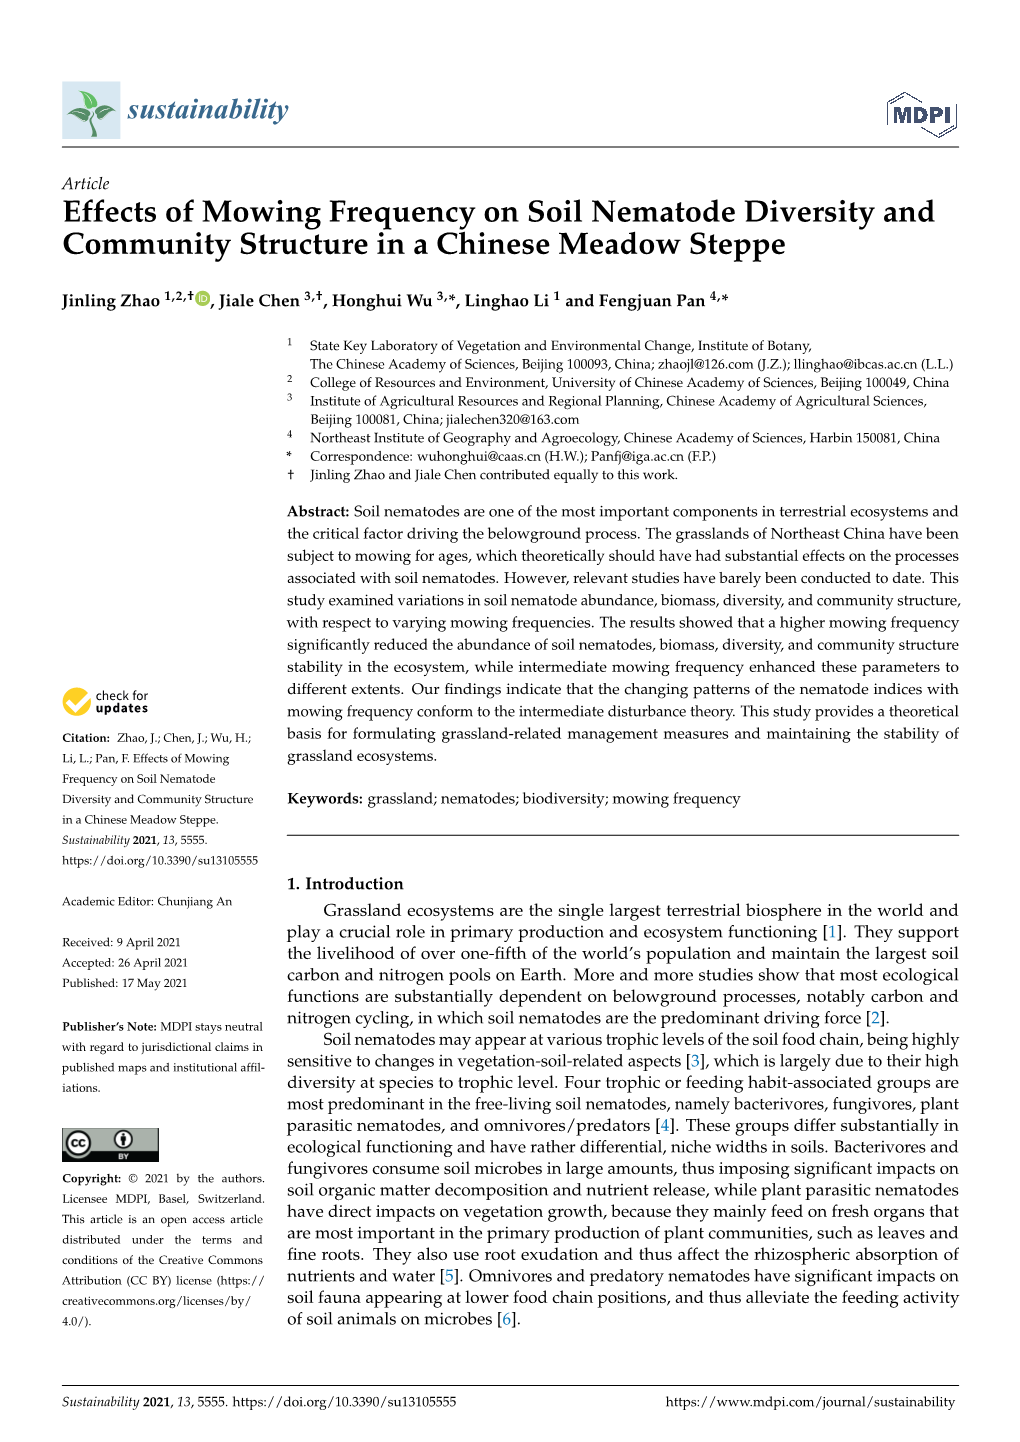 Effects of Mowing Frequency on Soil Nematode Diversity and Community Structure in a Chinese Meadow Steppe